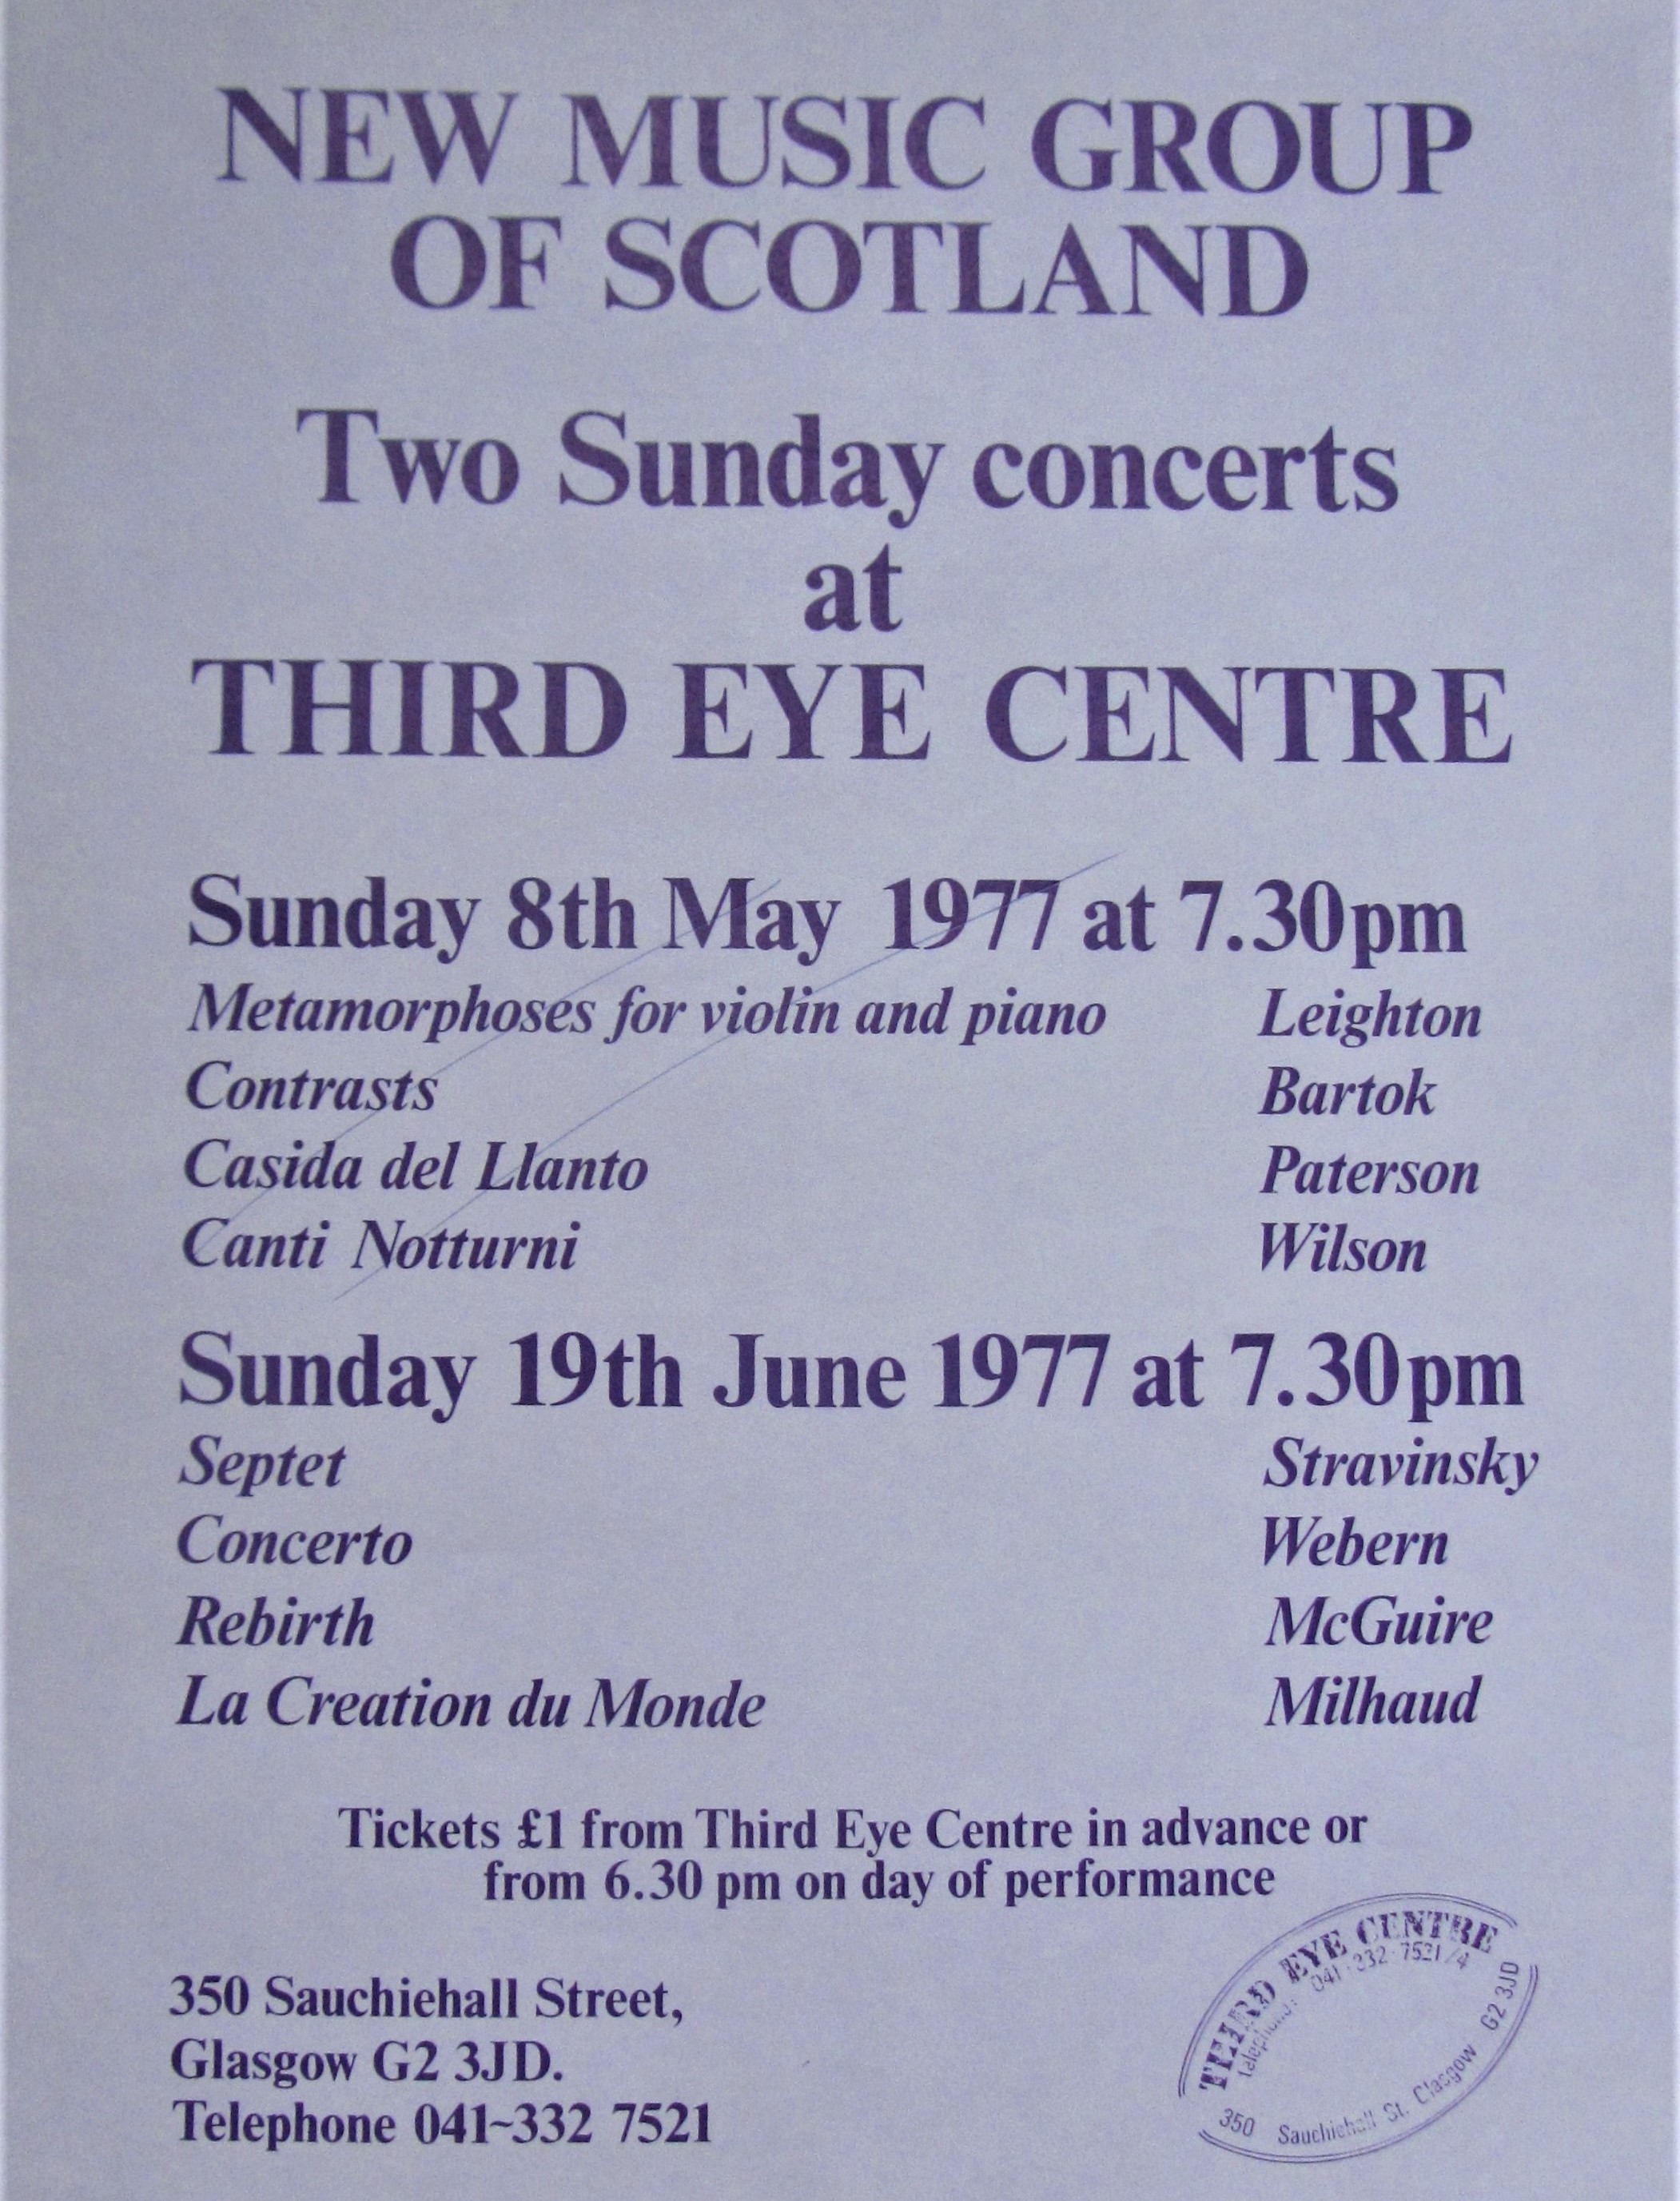 The New Music Group of Scotland played McGuire's Rebirth at this Glasgow concert in June 1977